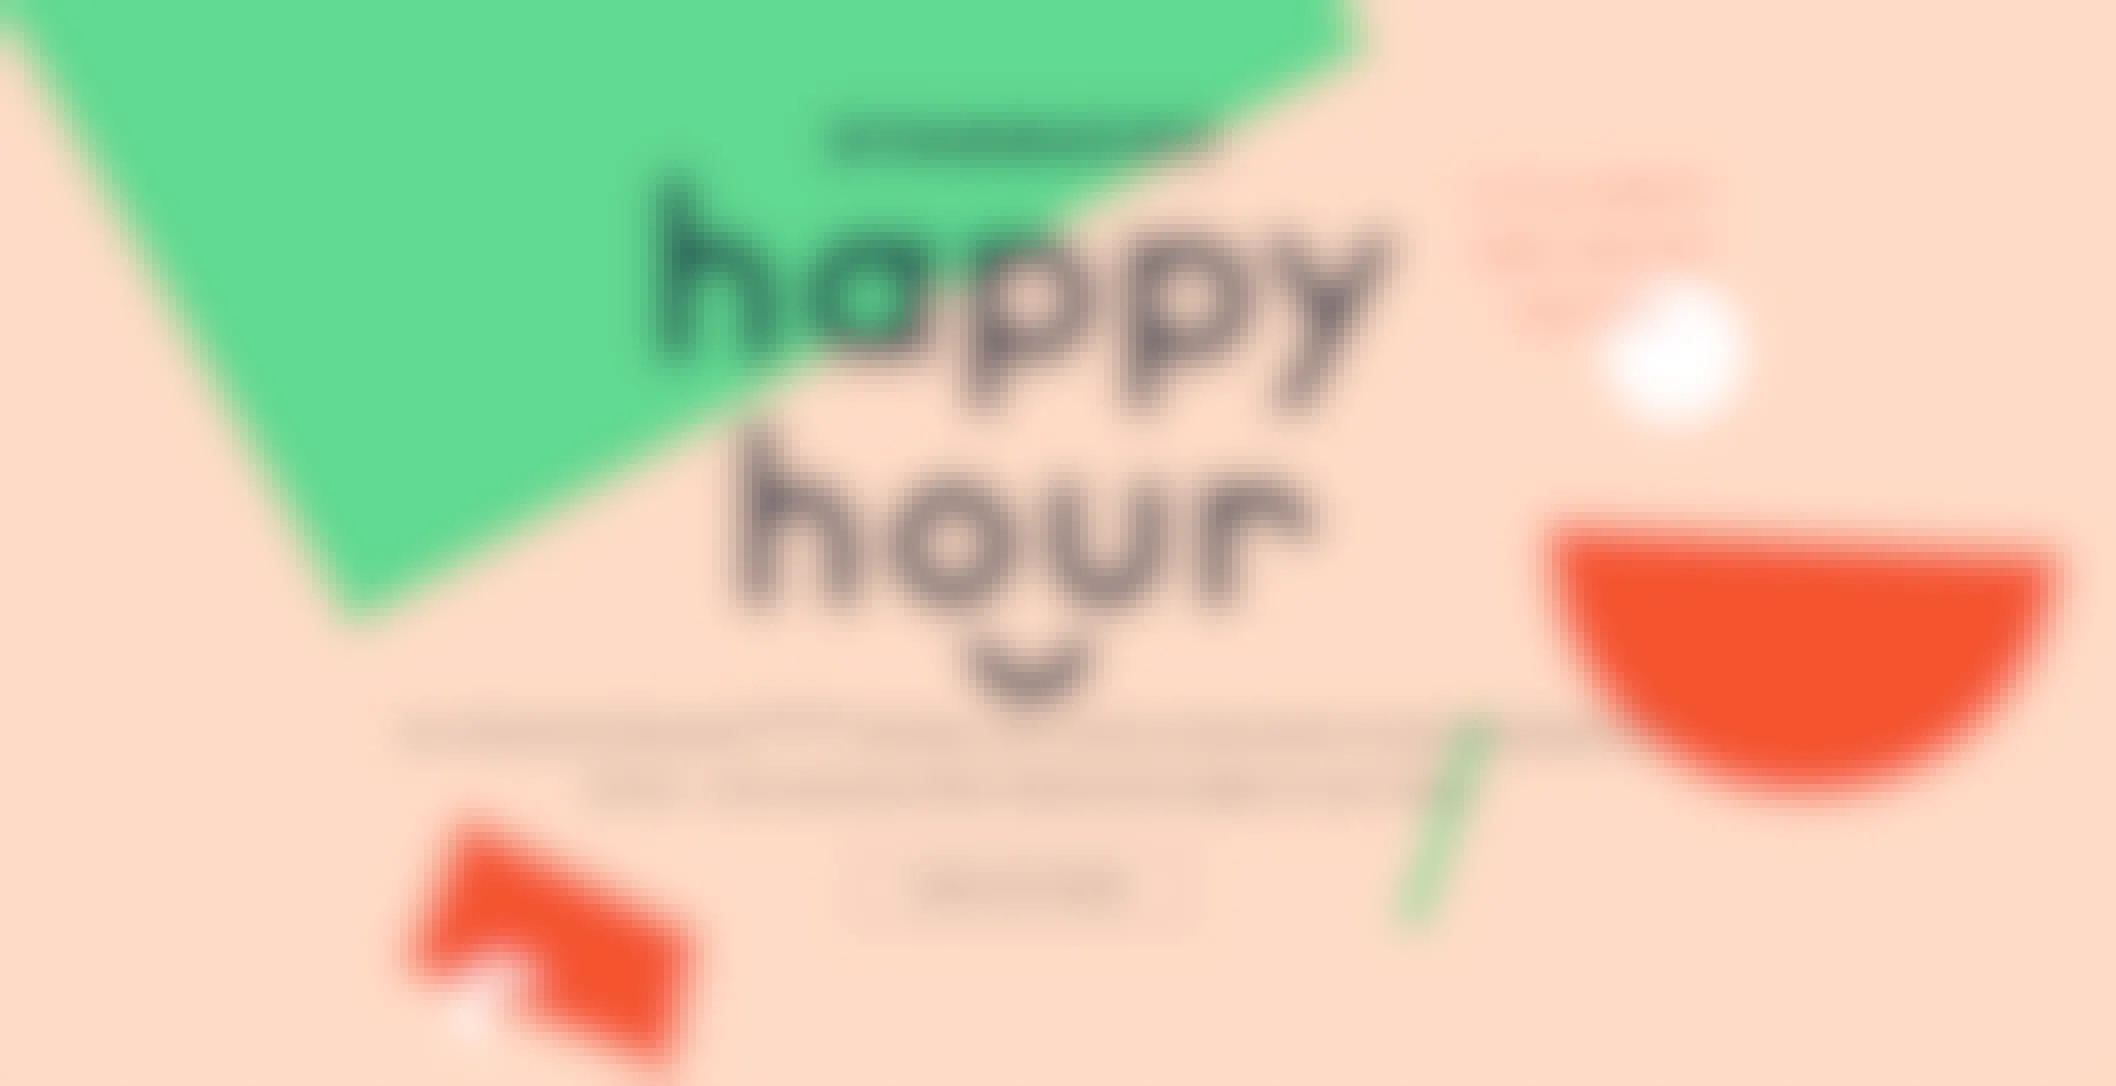 A graphic advertising Starbucks Happy Hour.